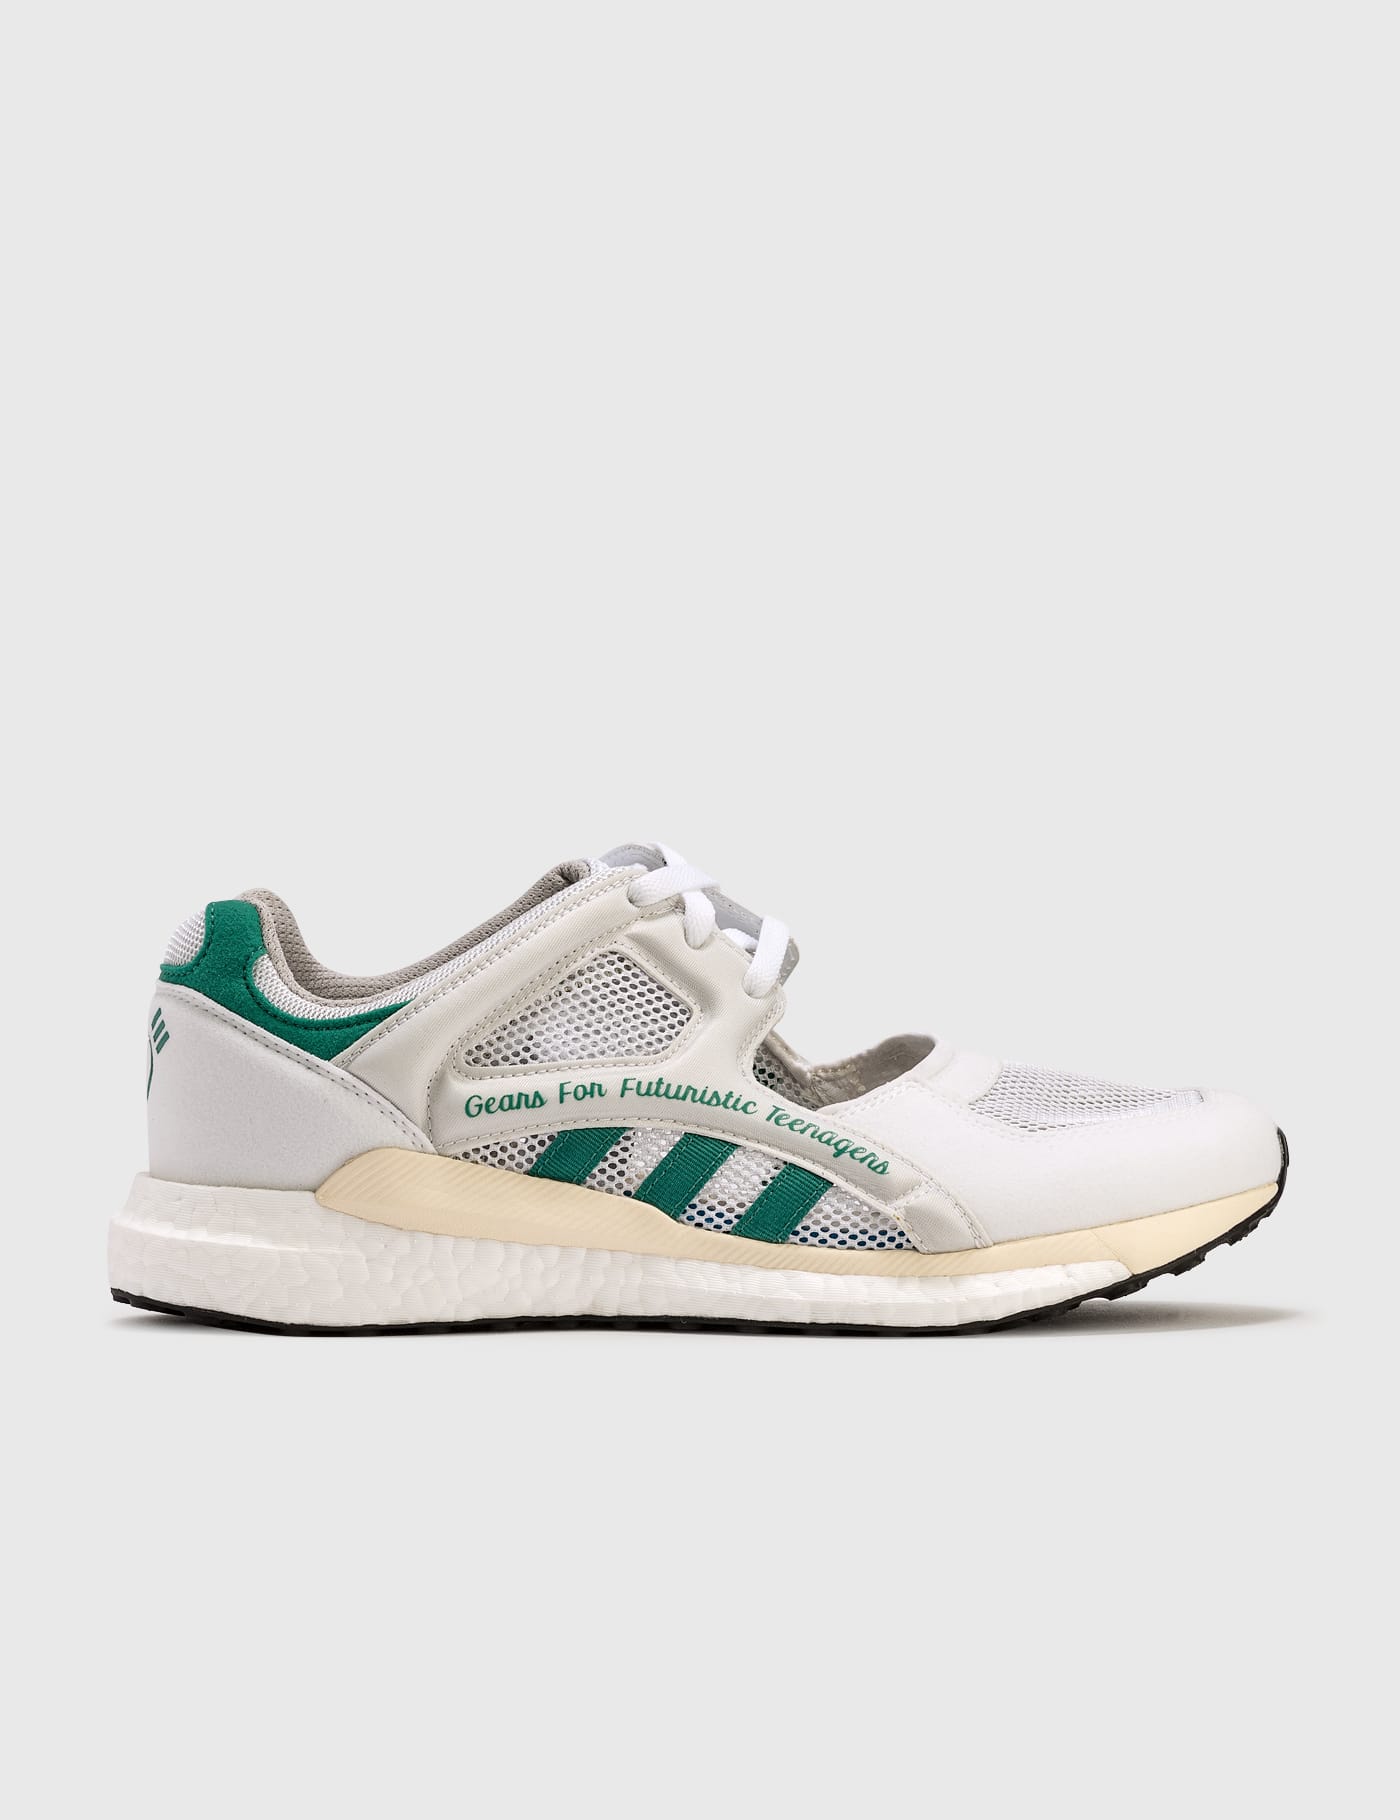 adidas eqt racing white and green